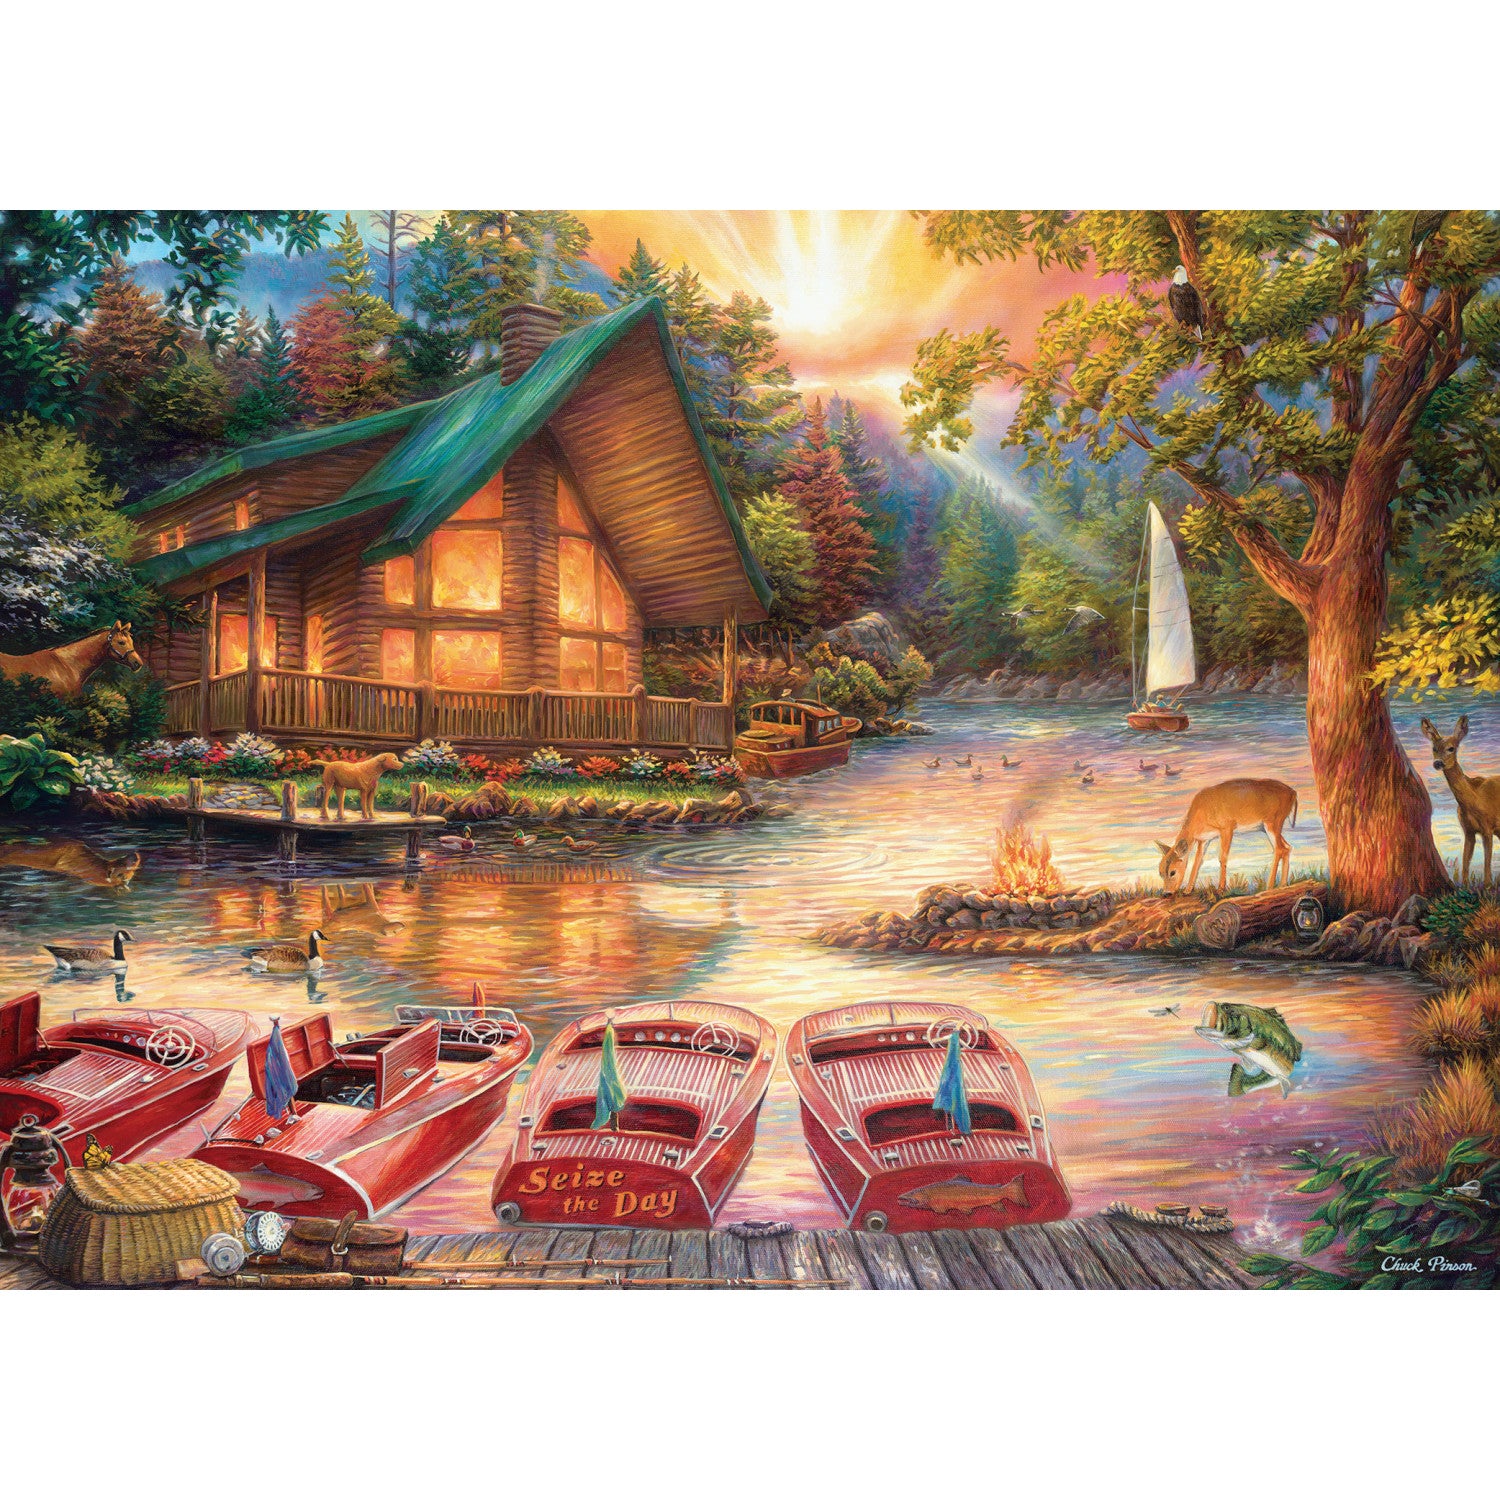 Art Gallery - Seize The Day 1000 Piece Puzzle